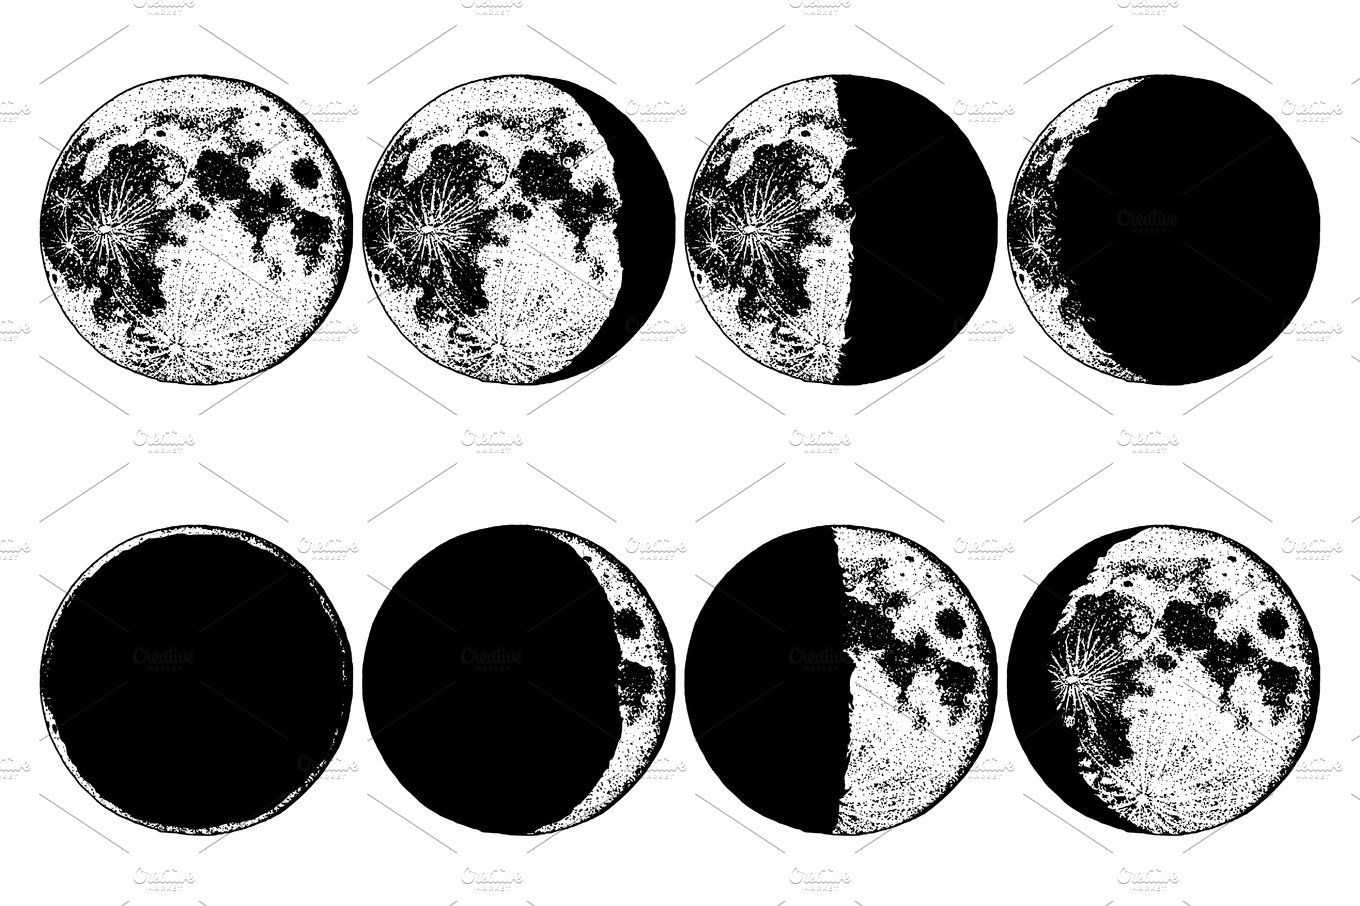 Moon phases 8 steps / Astronomy set cover image.